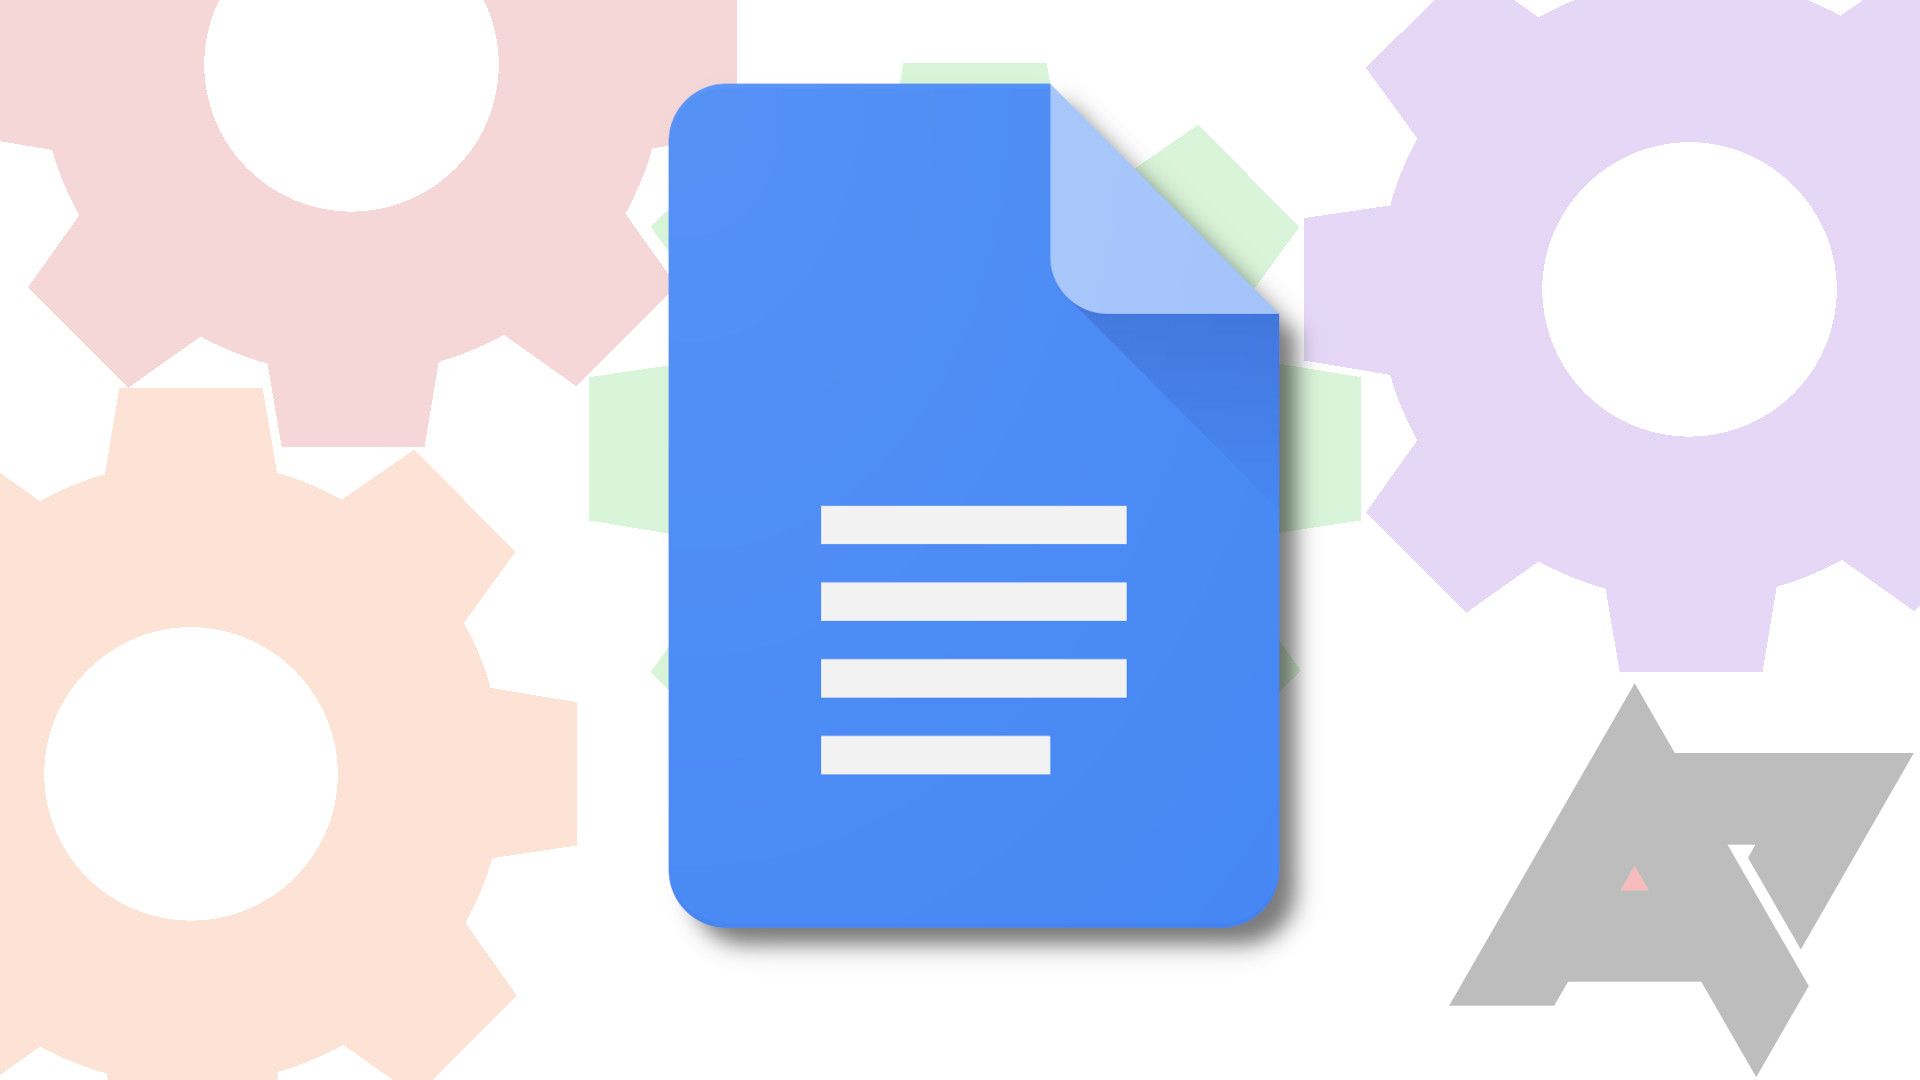 The Google Docs logo appears over colored gears suggesting advanced controls.